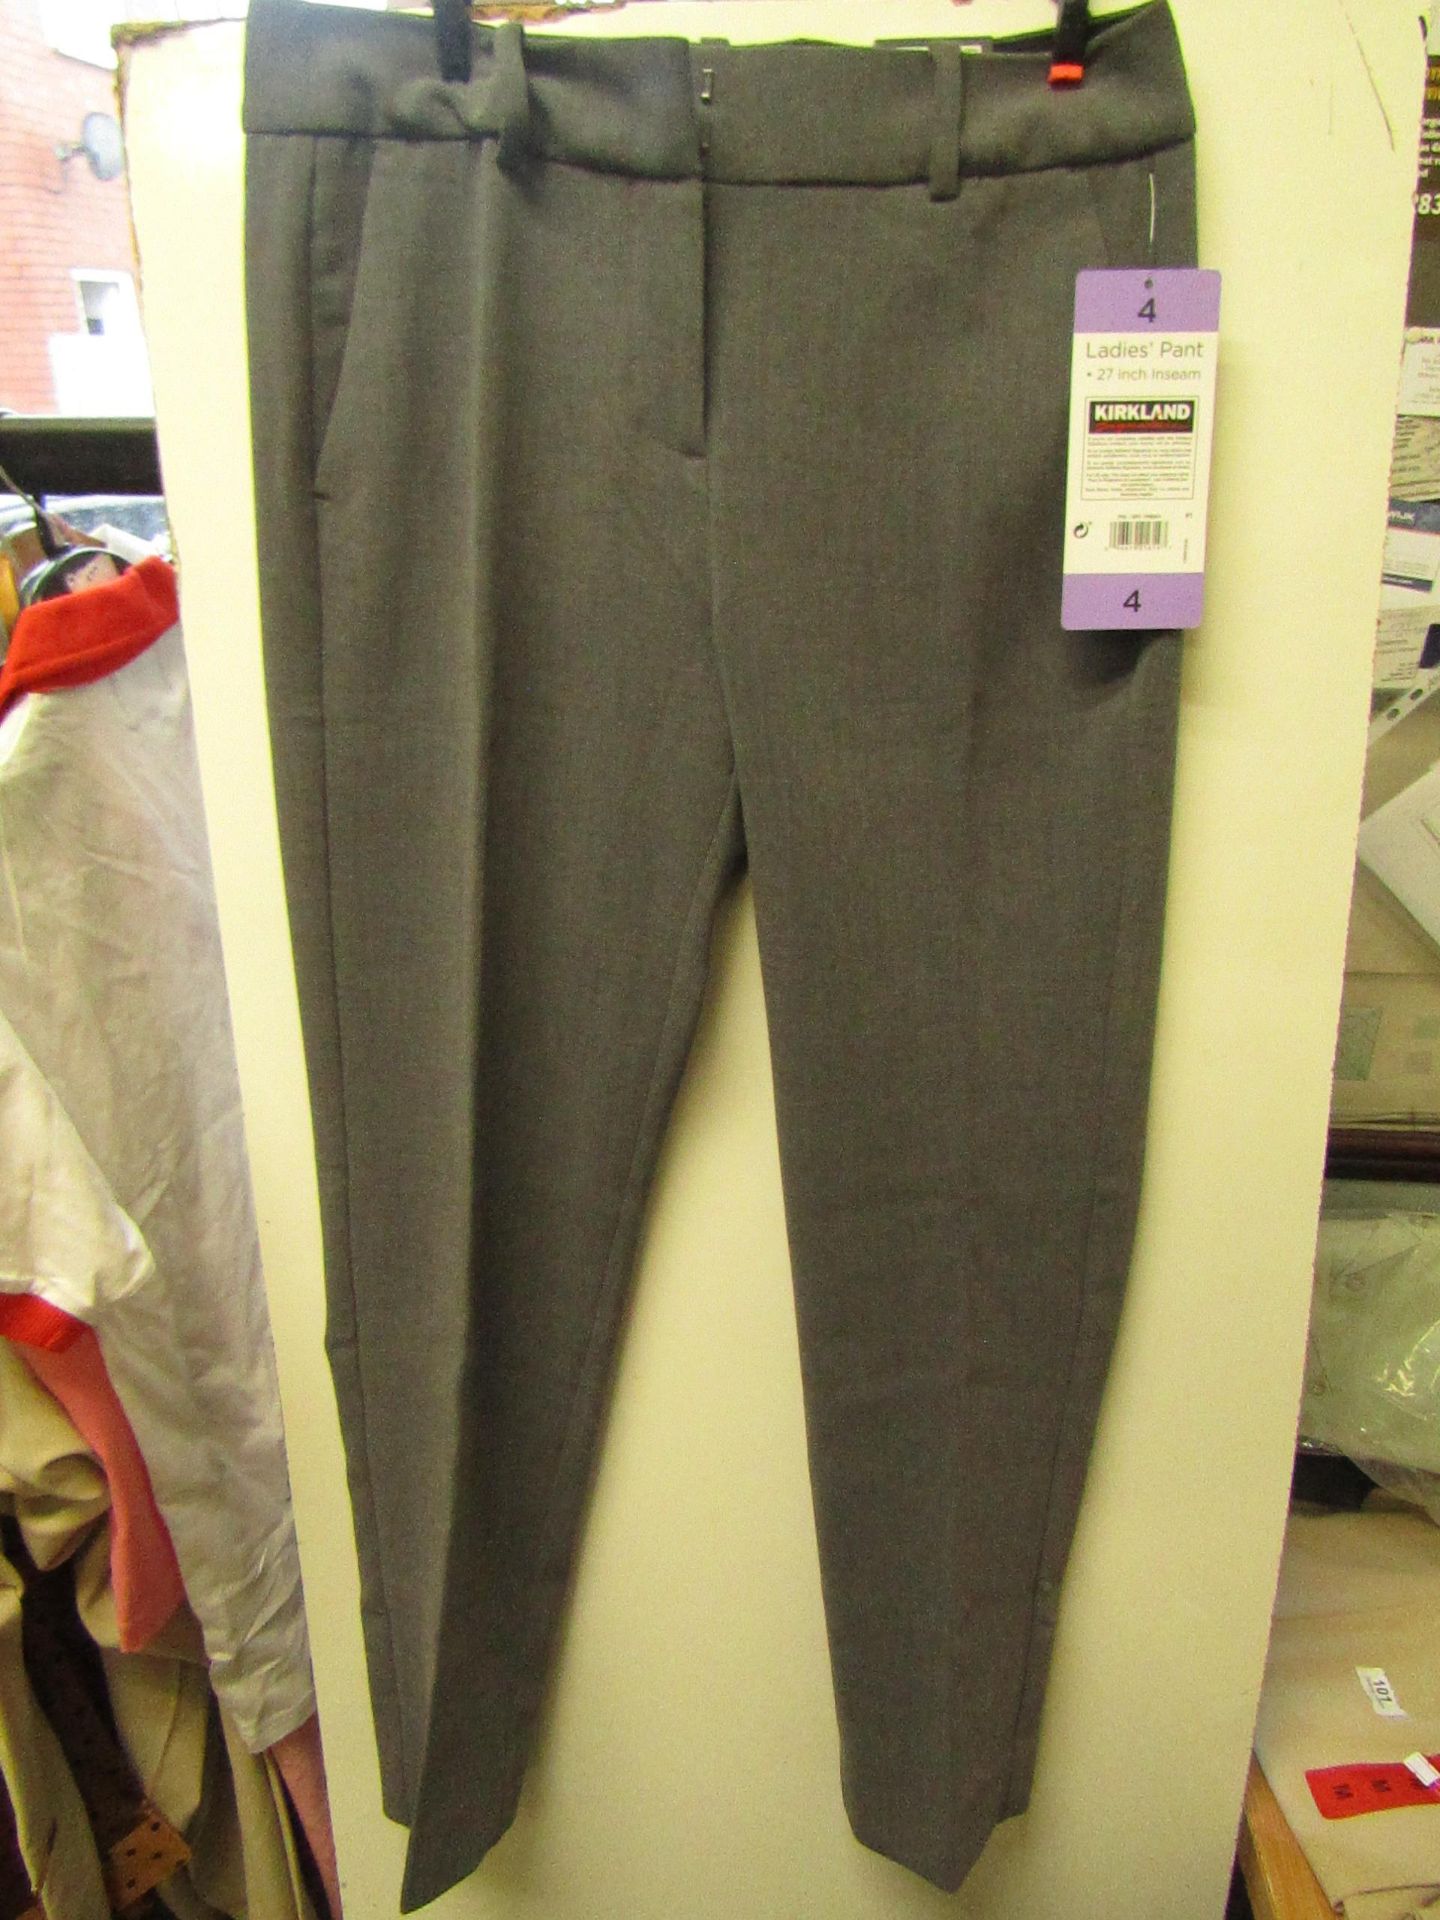 Kirkland Signature Ladies Pants Grey Size 4, 27 " Inseam New With Tags